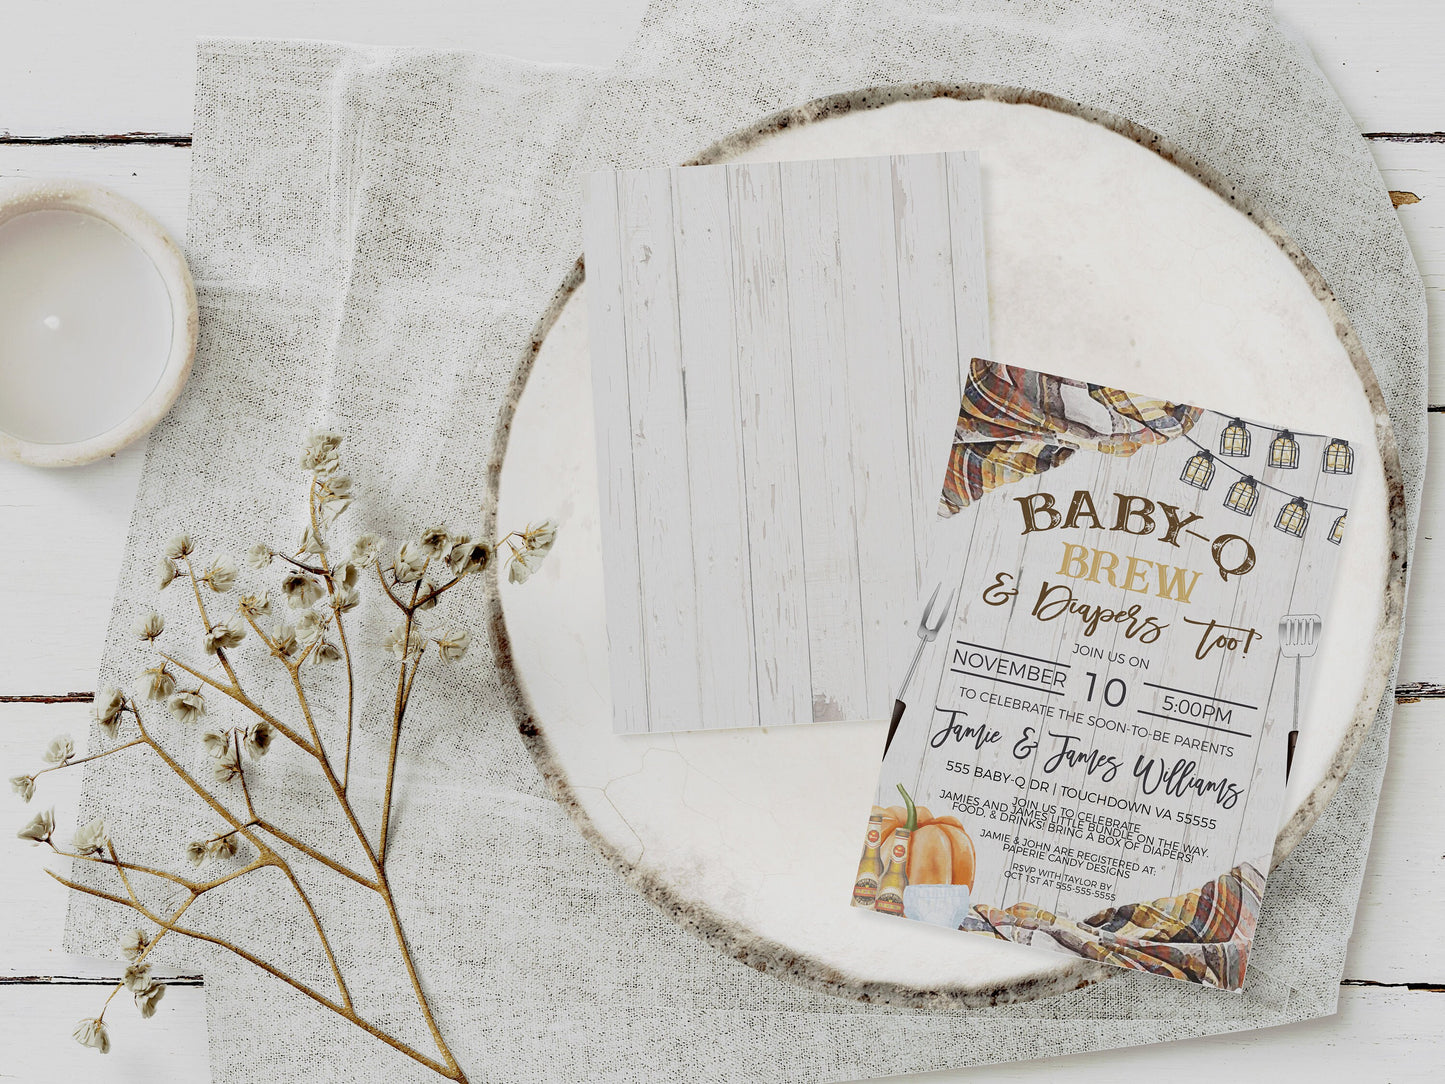 Fall Baby-Q Brew Diaper Shower Invitation, Autumn BBQ Beer Diapers Invite, Backyard Barbecue, Couples Baby Shower, Editable Printable